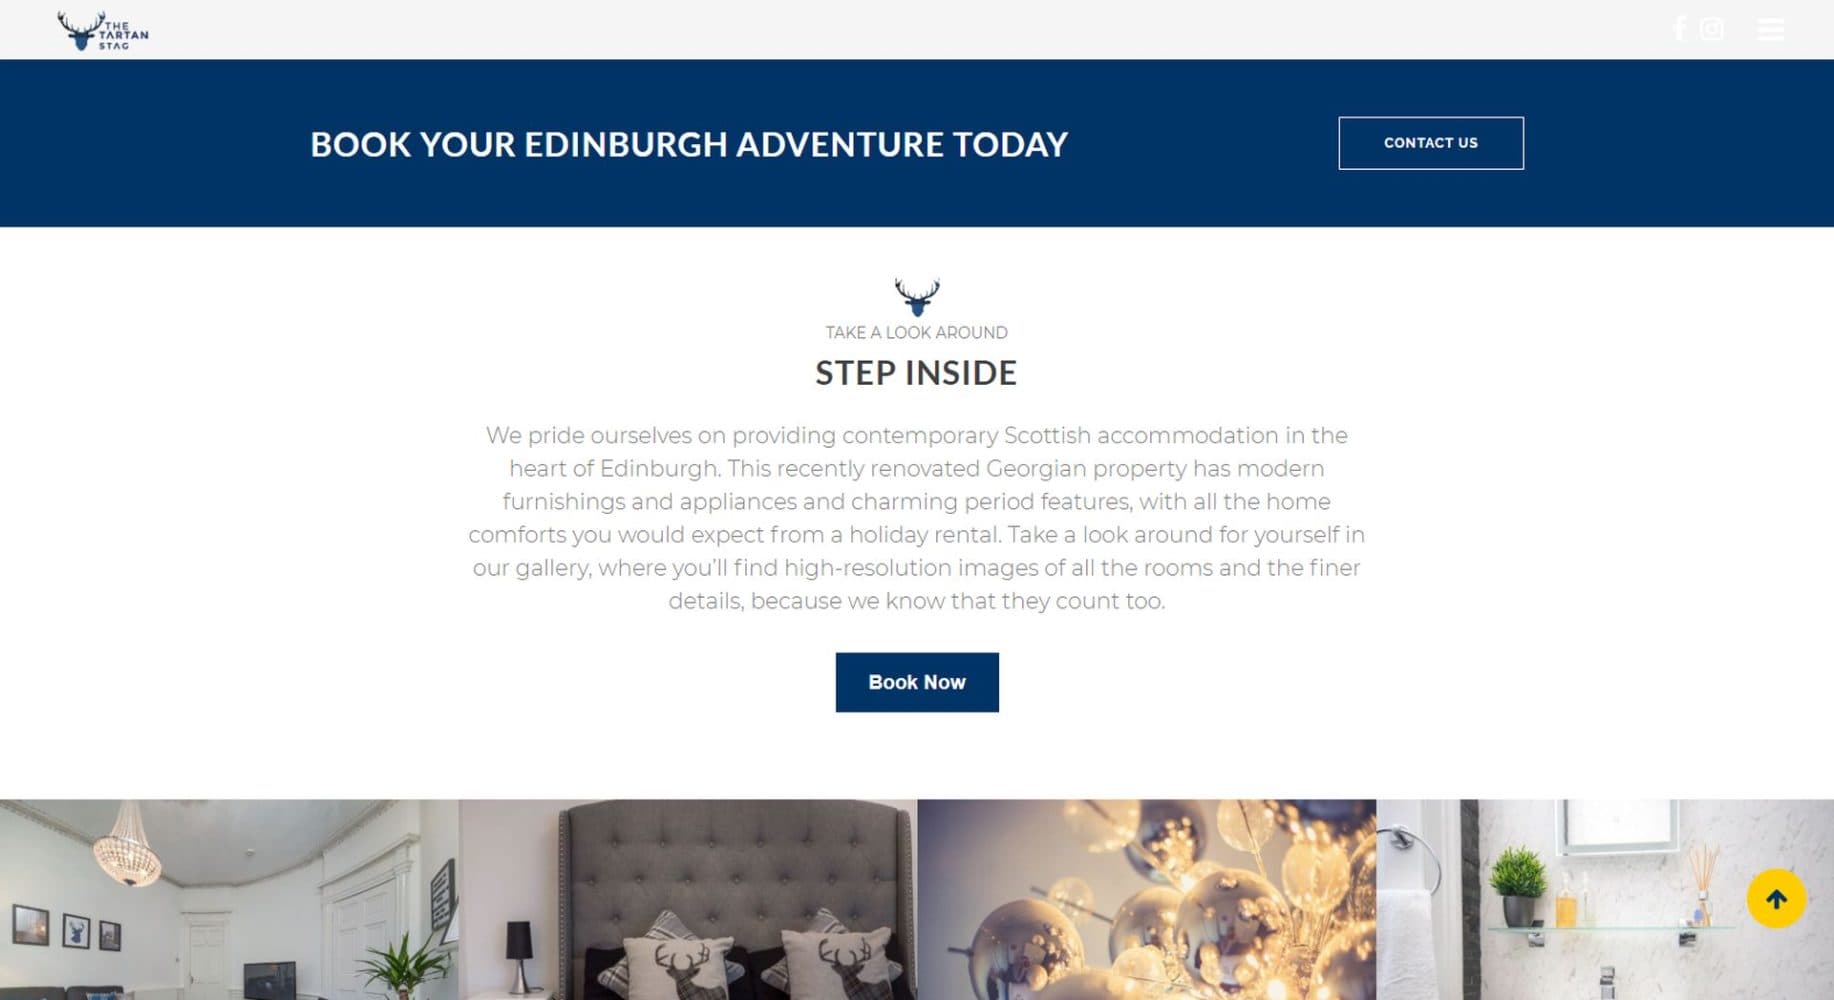 Tartan Stag Website Design Call To Action